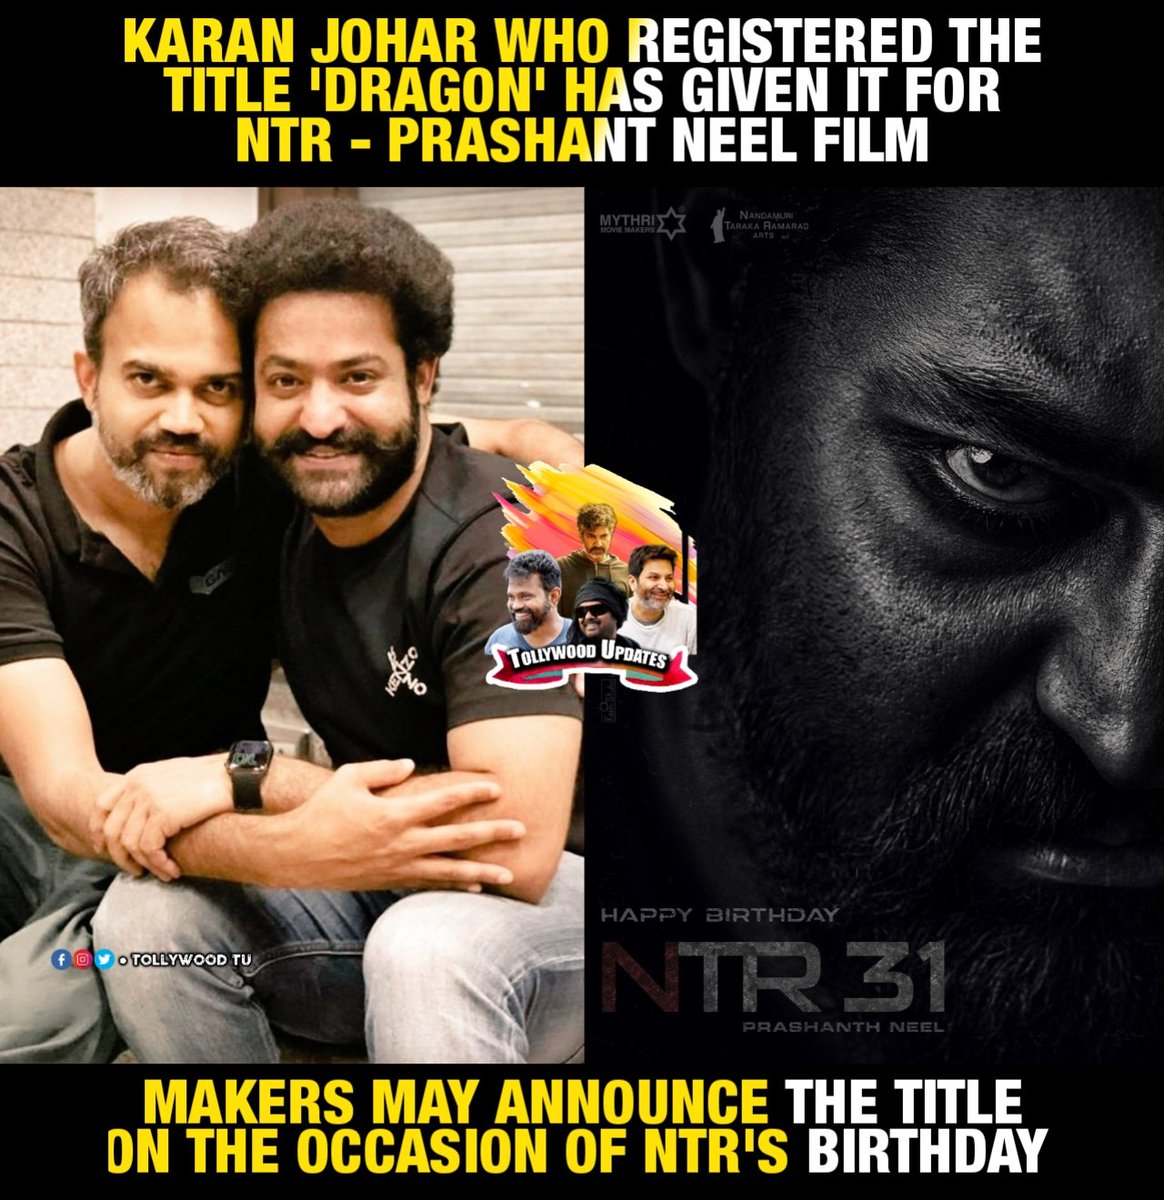 #KaranJohar registered the title #Dragon long back for #RanbirKapoor's #Brahmmastra. Later they opted for #Brahmmastra title as it is more rooted to our history. Now, #PrashantNeel and team opted the title #Dragon for #NTR31. Expect an official title poster soon. #JrNTR